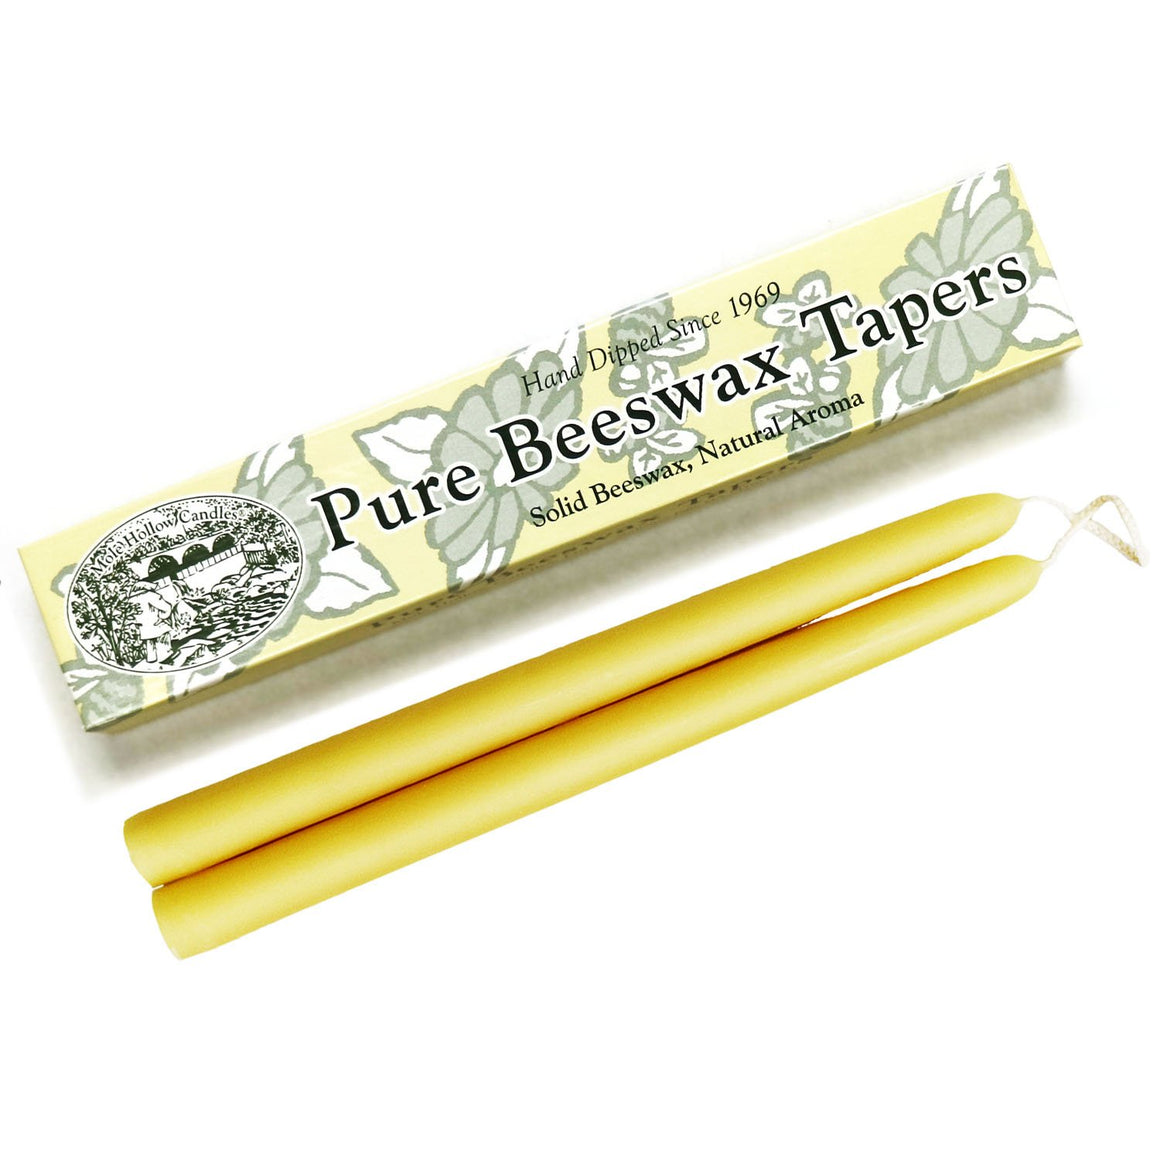 10" Beeswax Taper Candles, Single-Pair Gift Box